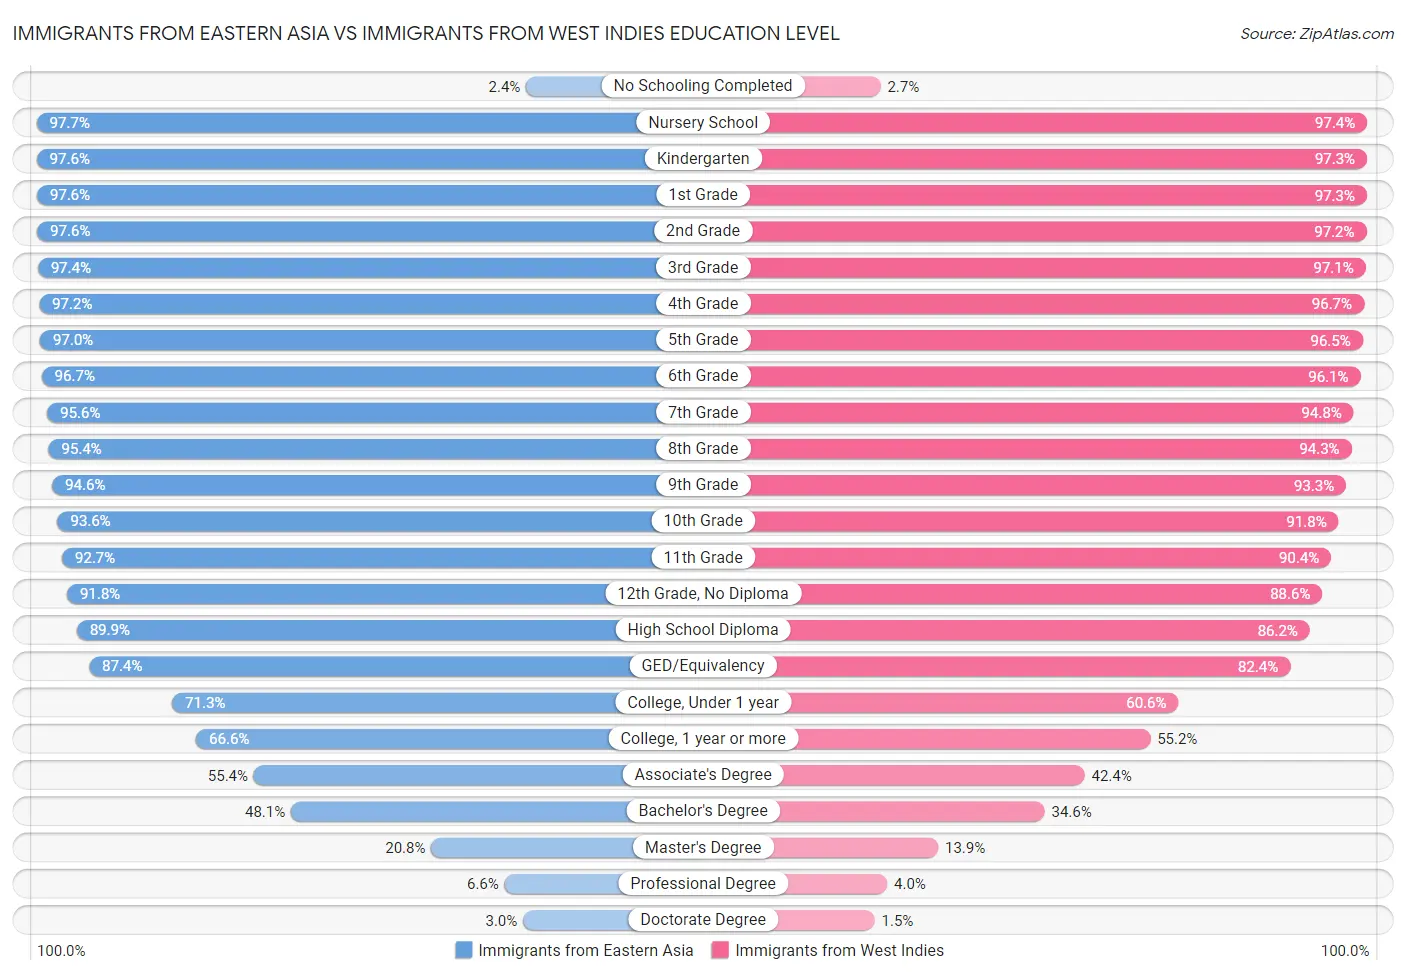 Immigrants from Eastern Asia vs Immigrants from West Indies Education Level